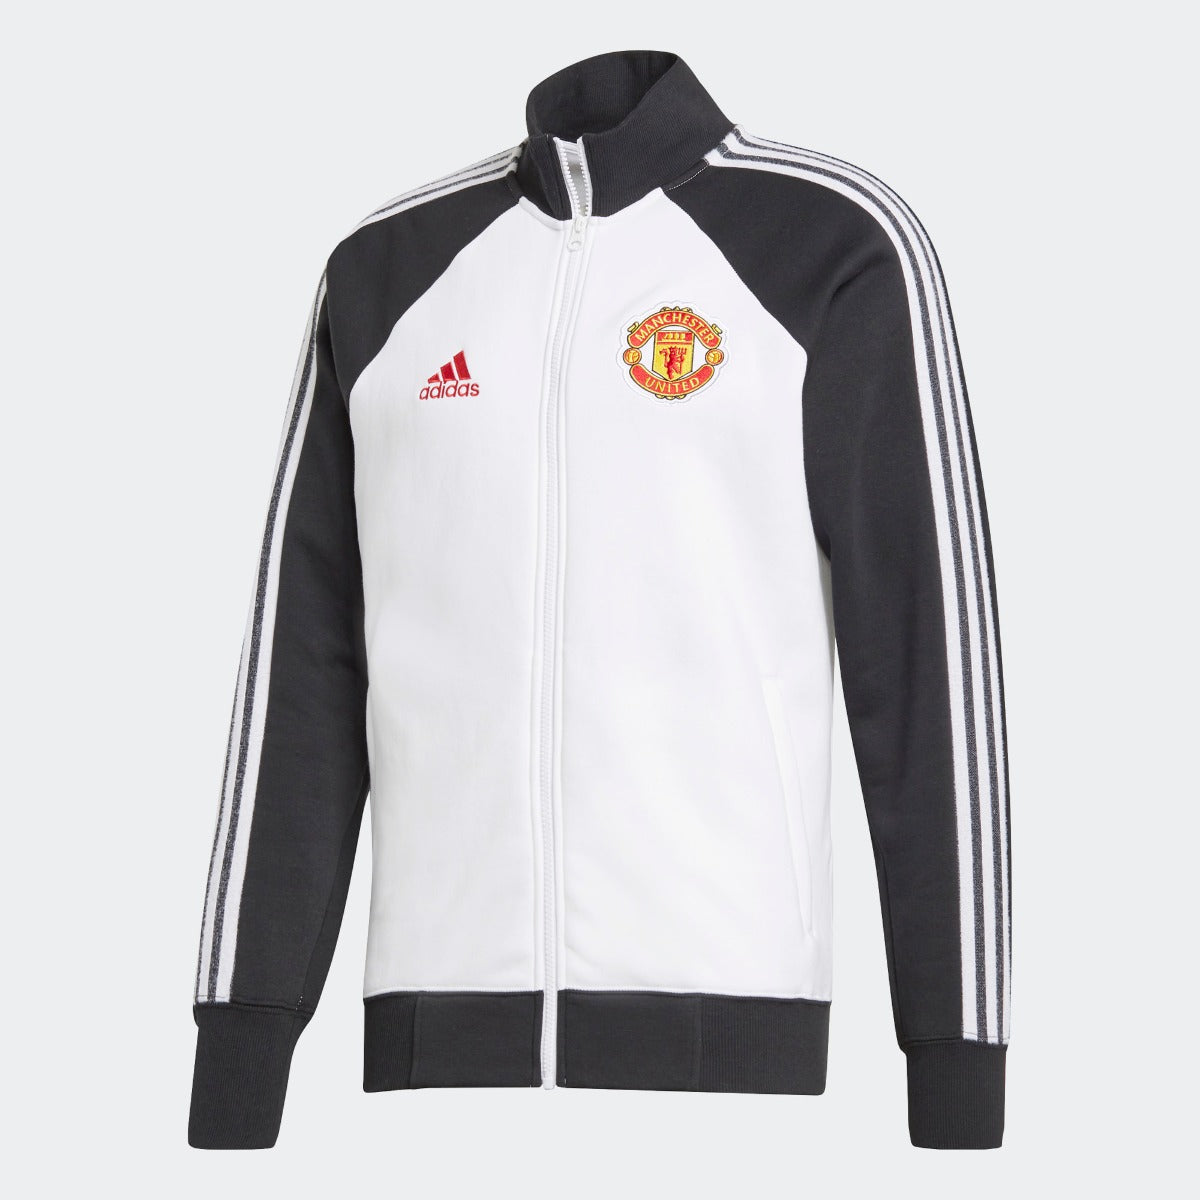 Adidas 2020-21 Manchester United Icons Top - Black-White